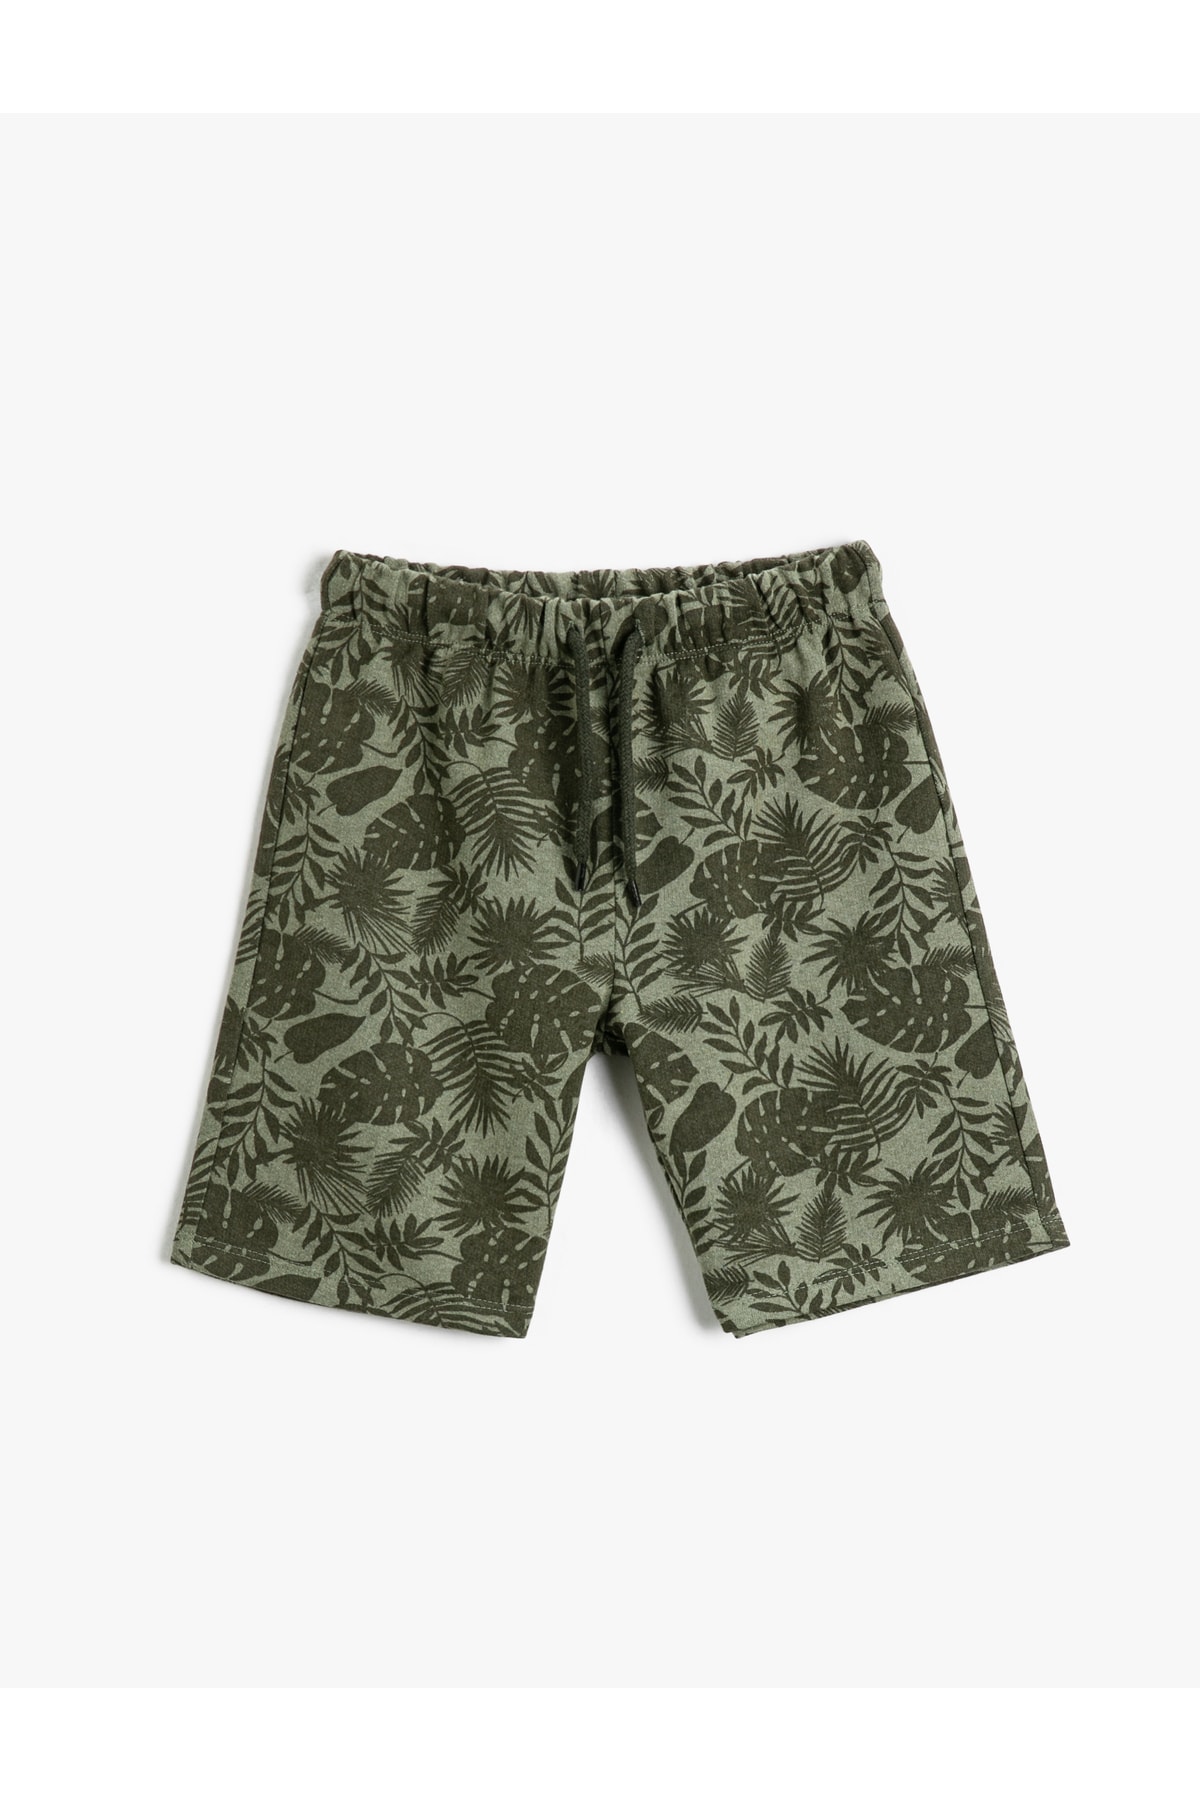 Koton Palm Patterned Shorts Above Knee Tie Waist